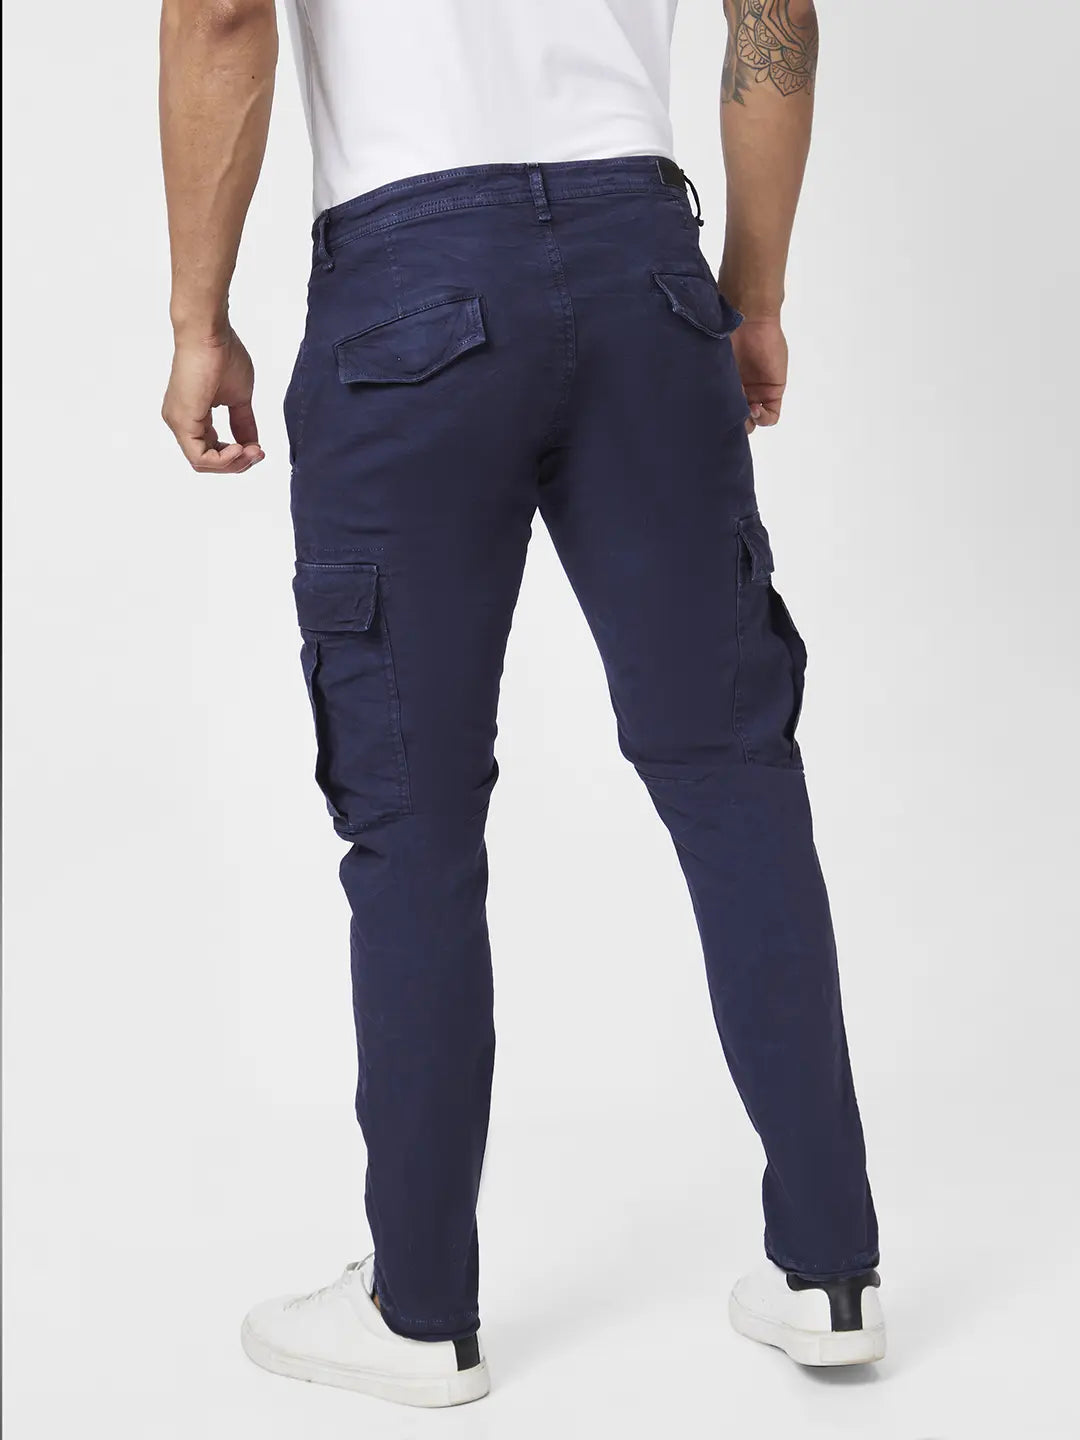 Is That The New Guys Letter Patched Cargo Pants ?? | Blue pants men, Blue  outfit men, Cargo pants outfit men